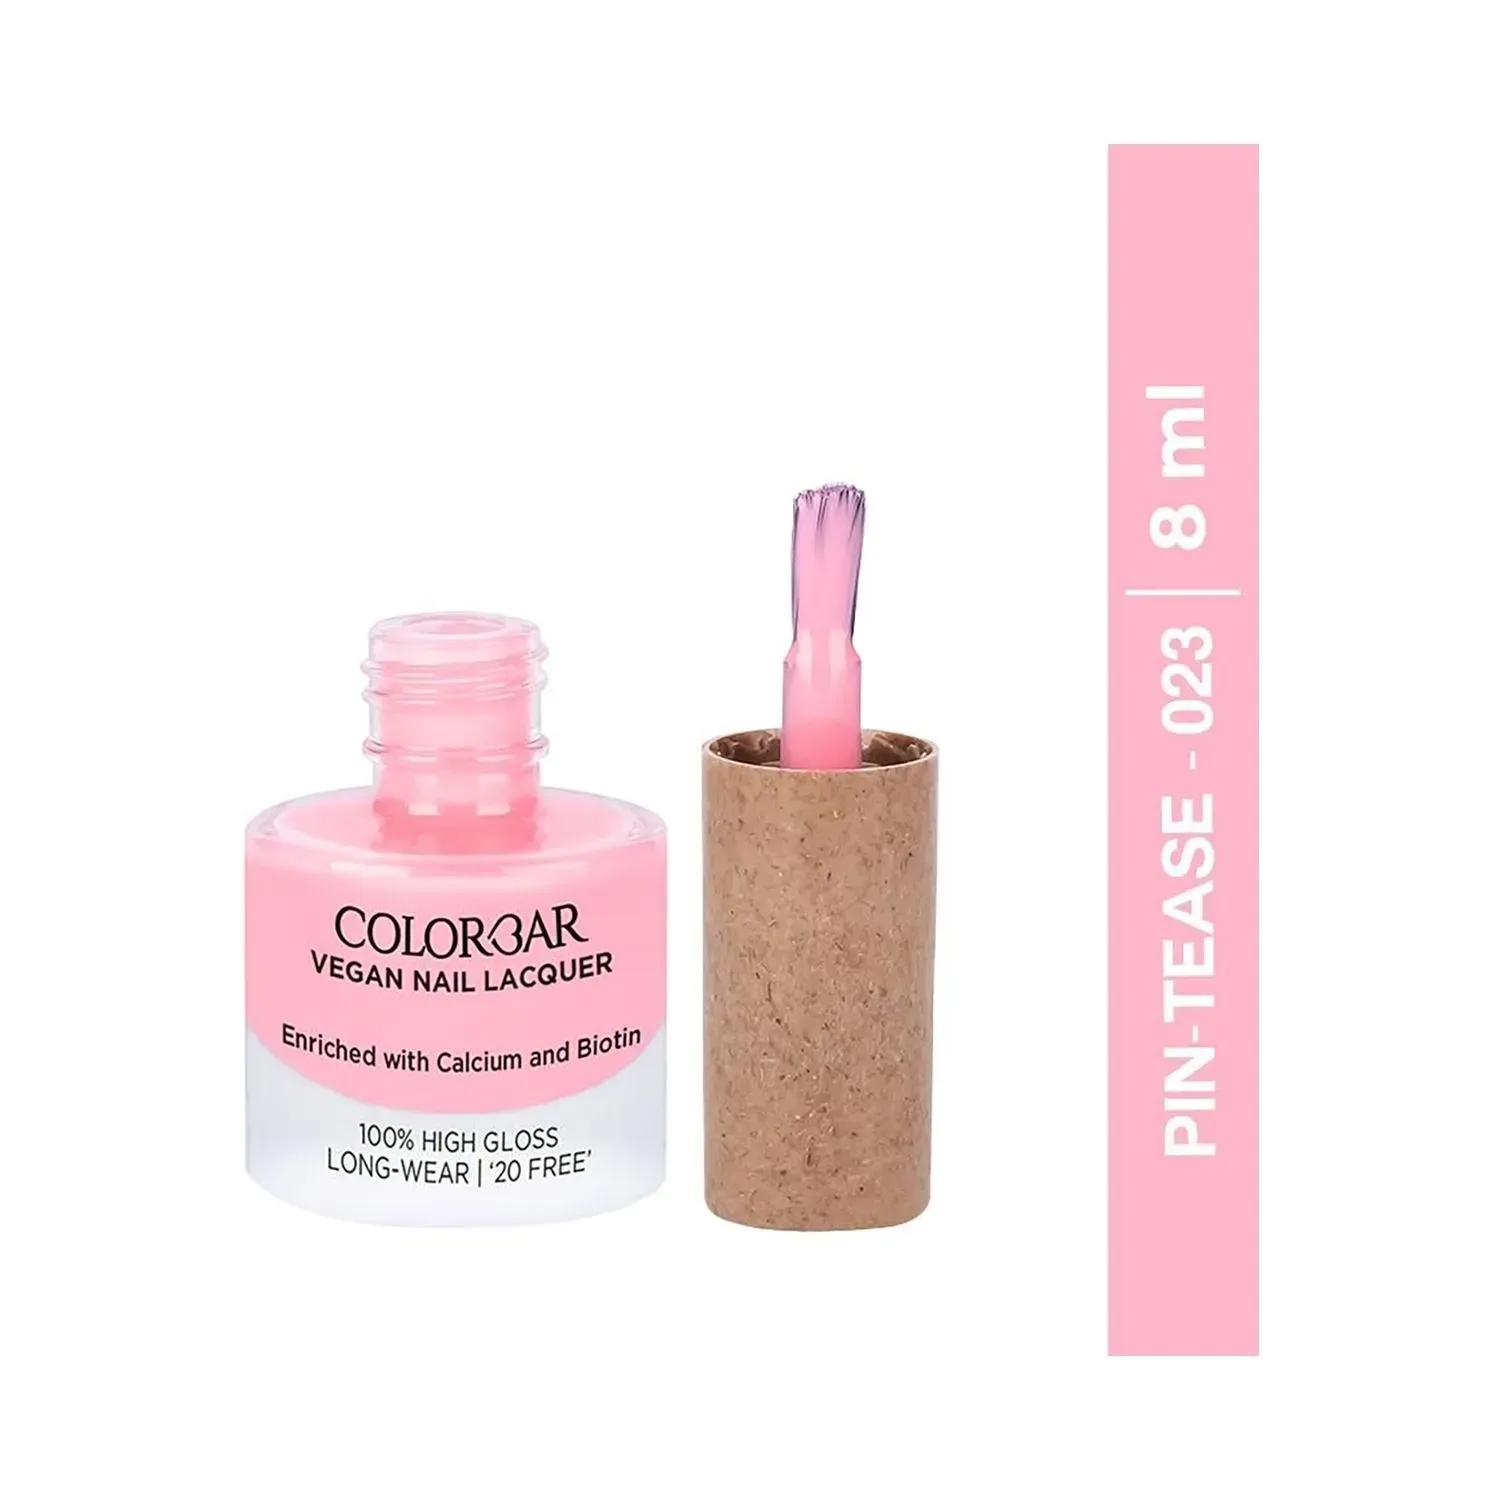 Buy Colorbar X Jacqueline Shine With Love Nail Lacquer Online-cacanhphuclong.com.vn